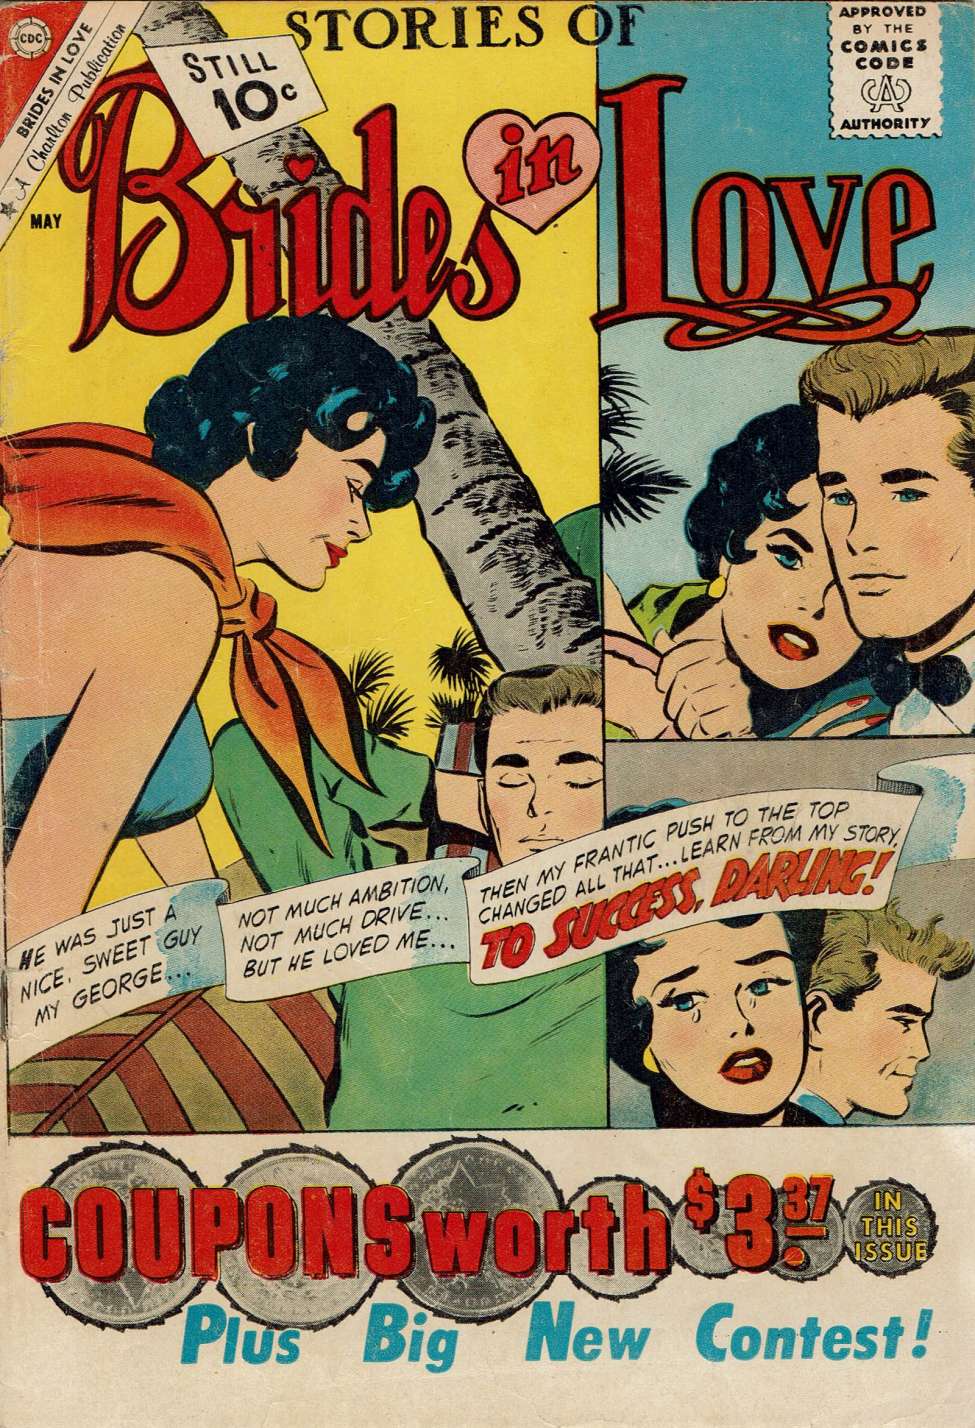 Book Cover For Brides in Love 24